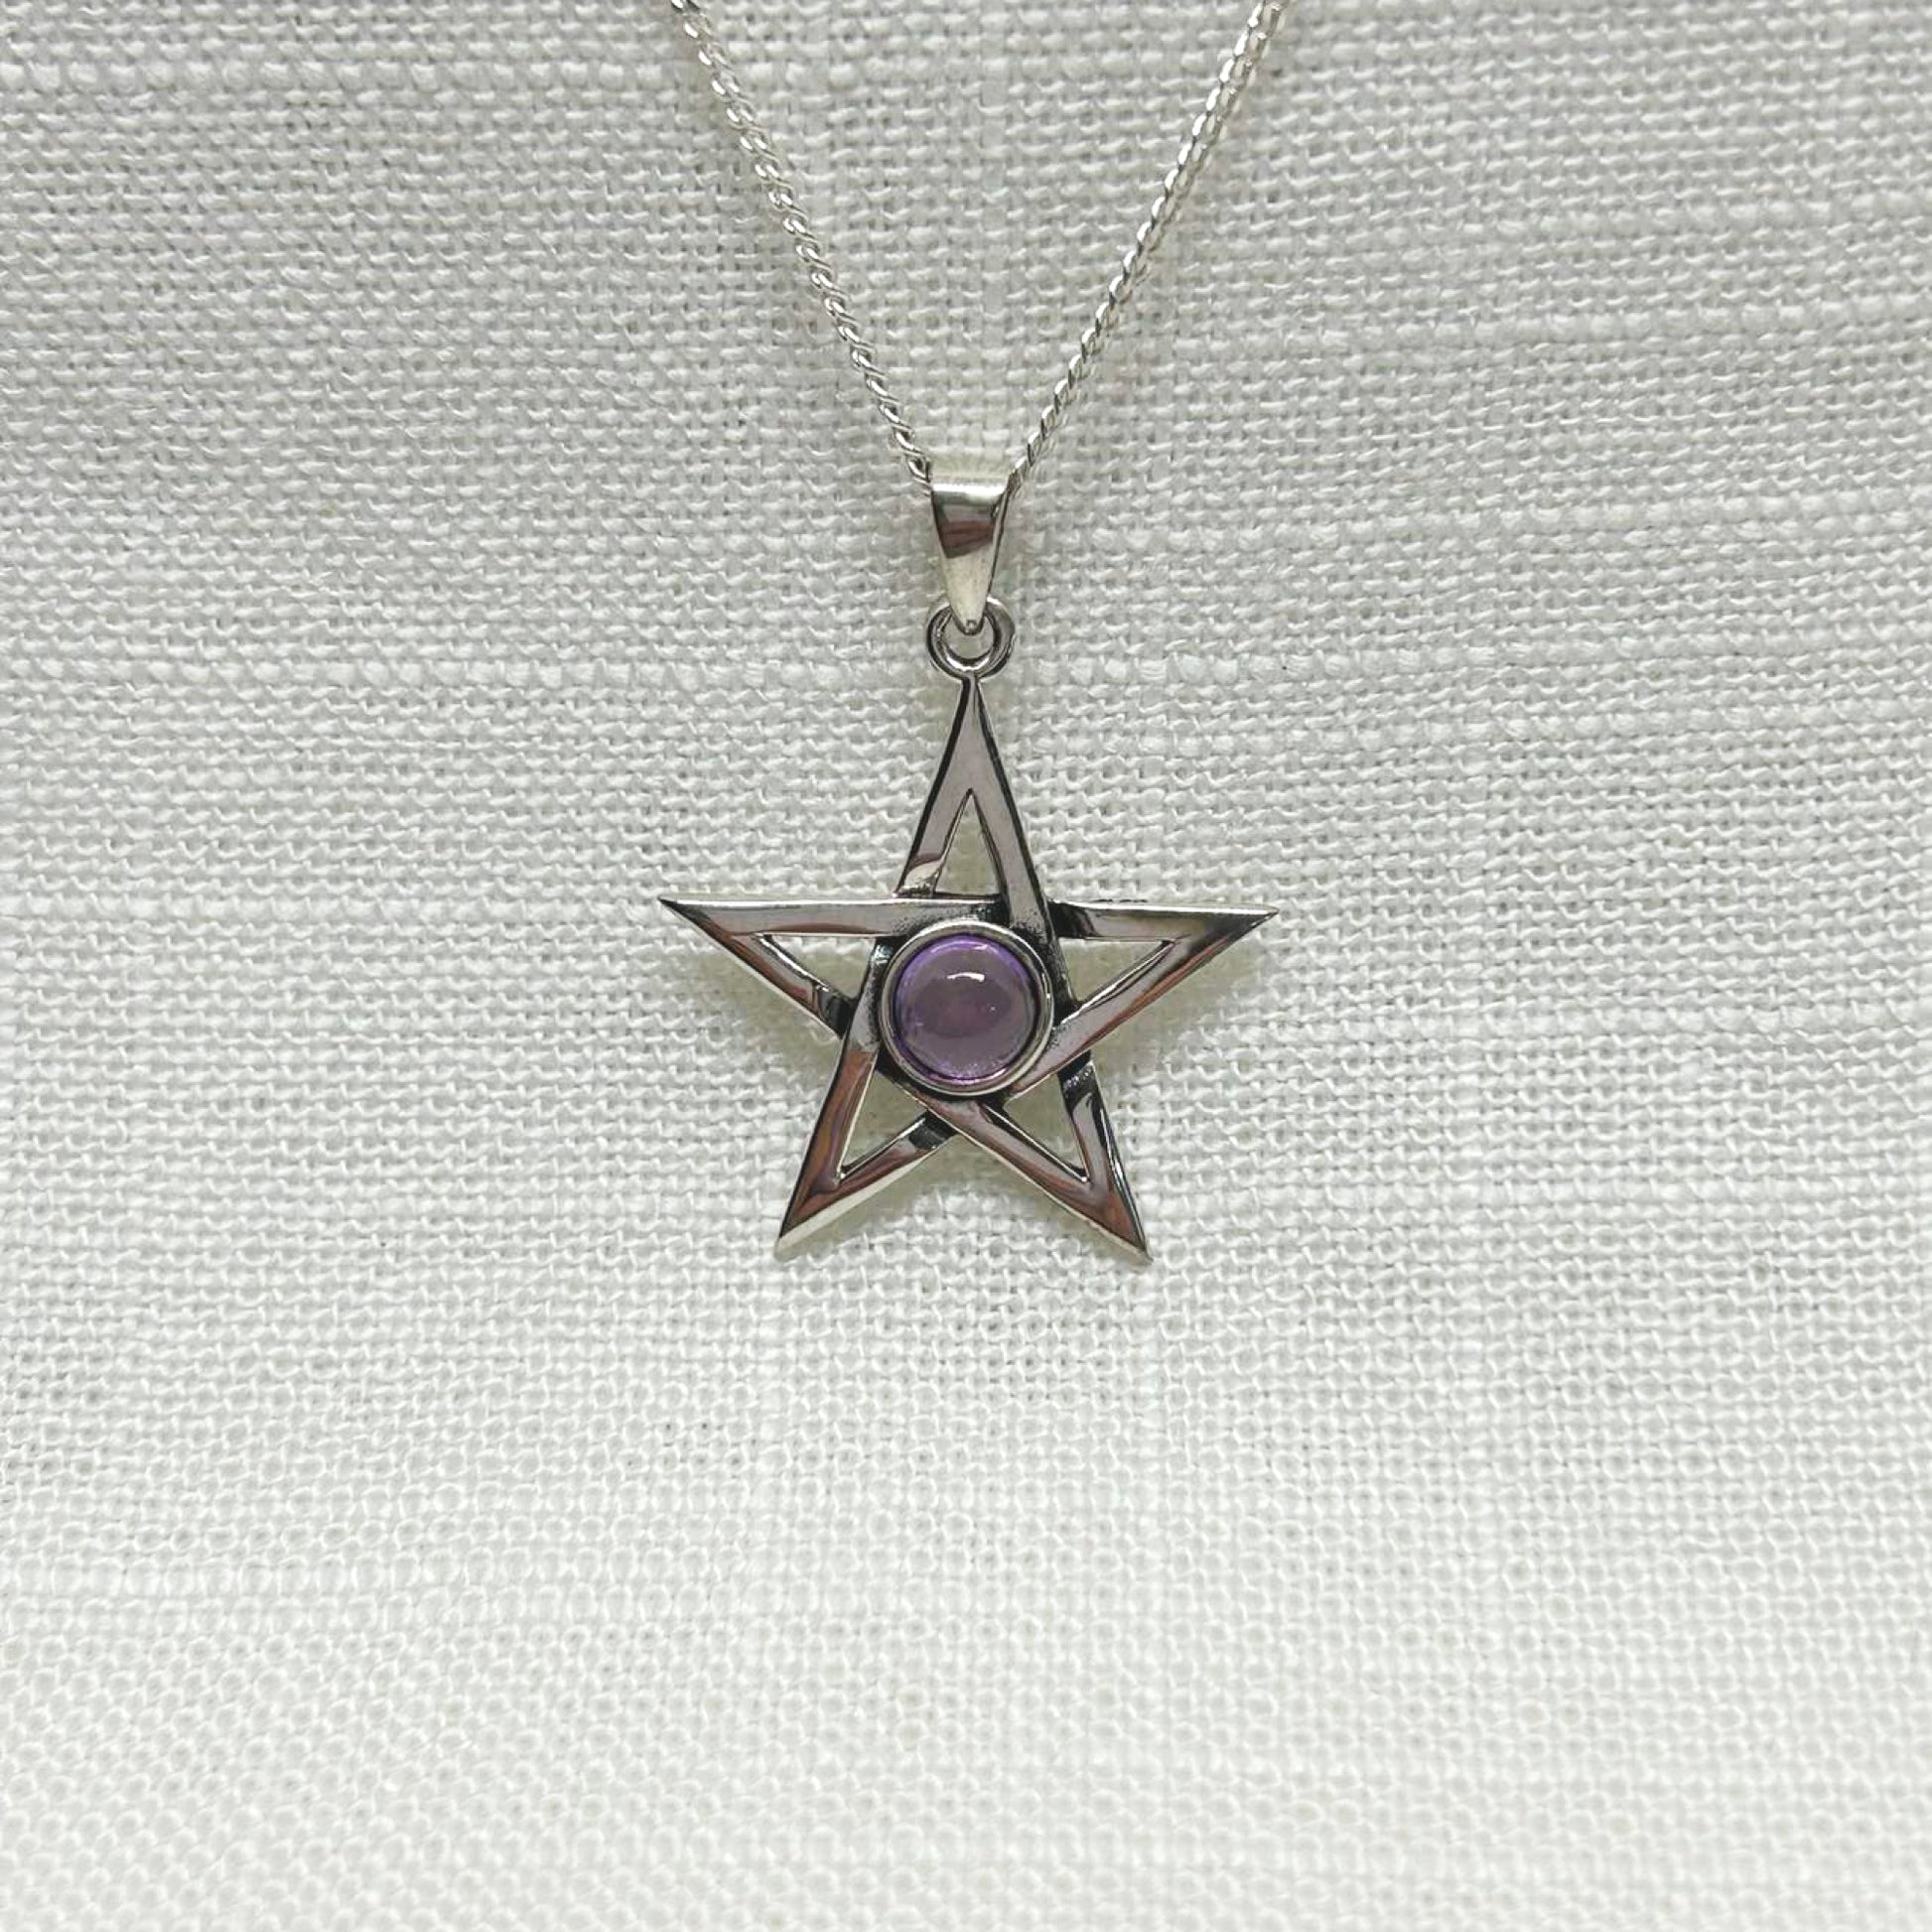 A beautiful .925 silver highly polished pentagram necklace with an amethyst cabochon in the centre. All pendants come supplied on an 20" Sterling Silver Curb Chain and are gift boxed. Size approx: H: 3.2cm including bale, Amethyst cabochon 9mm dia